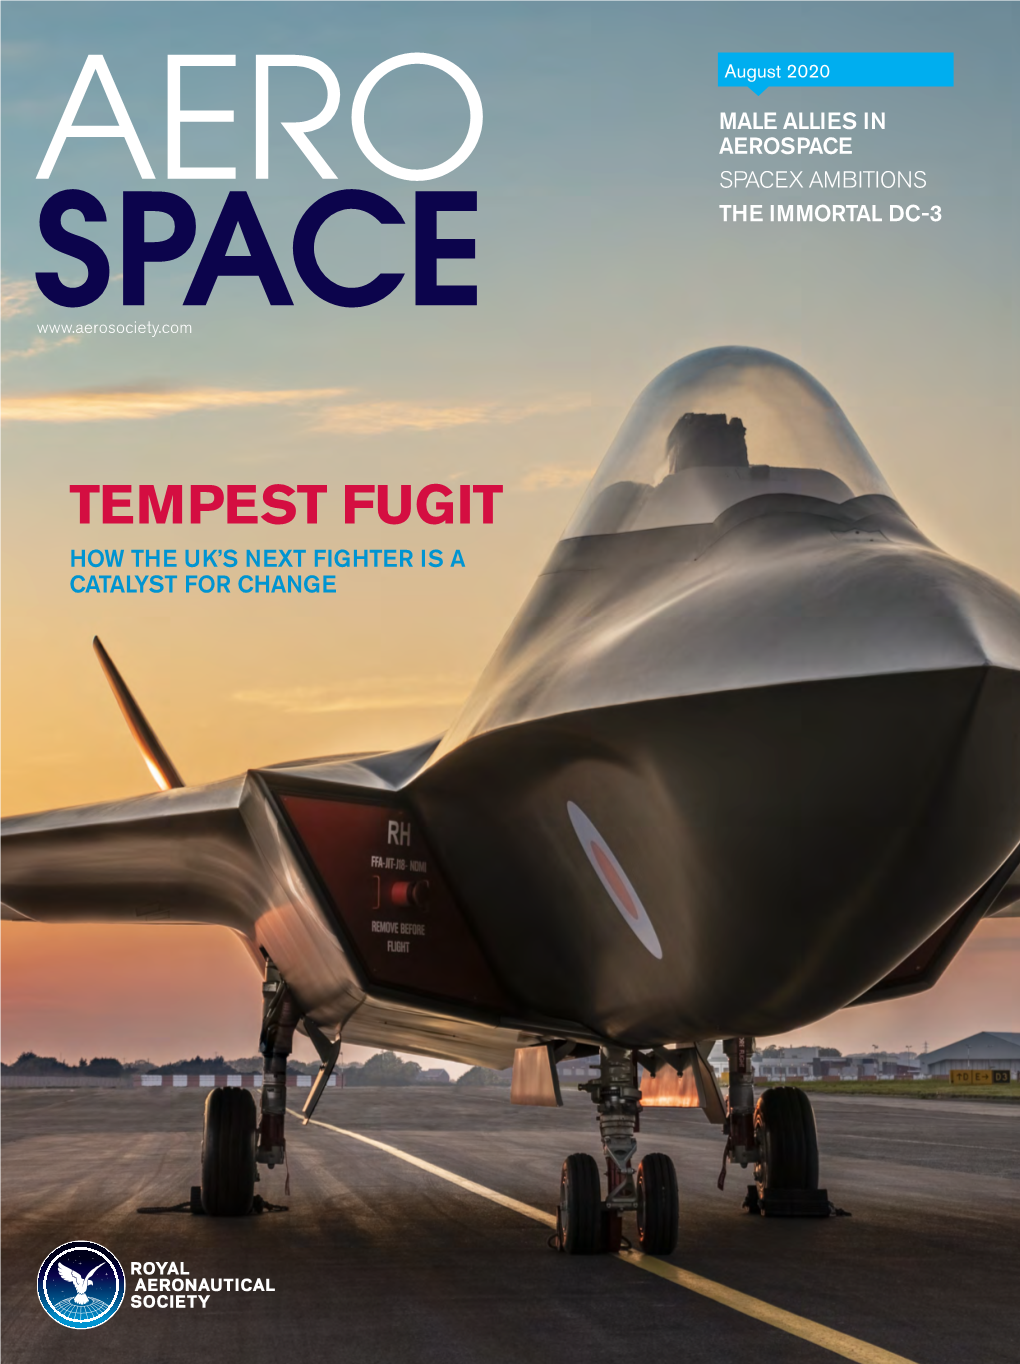 TEMPEST FUGIT V Olume 47 Number 8 HOW the UK’S NEXT FIGHTER IS a CATALYST for CHANGE